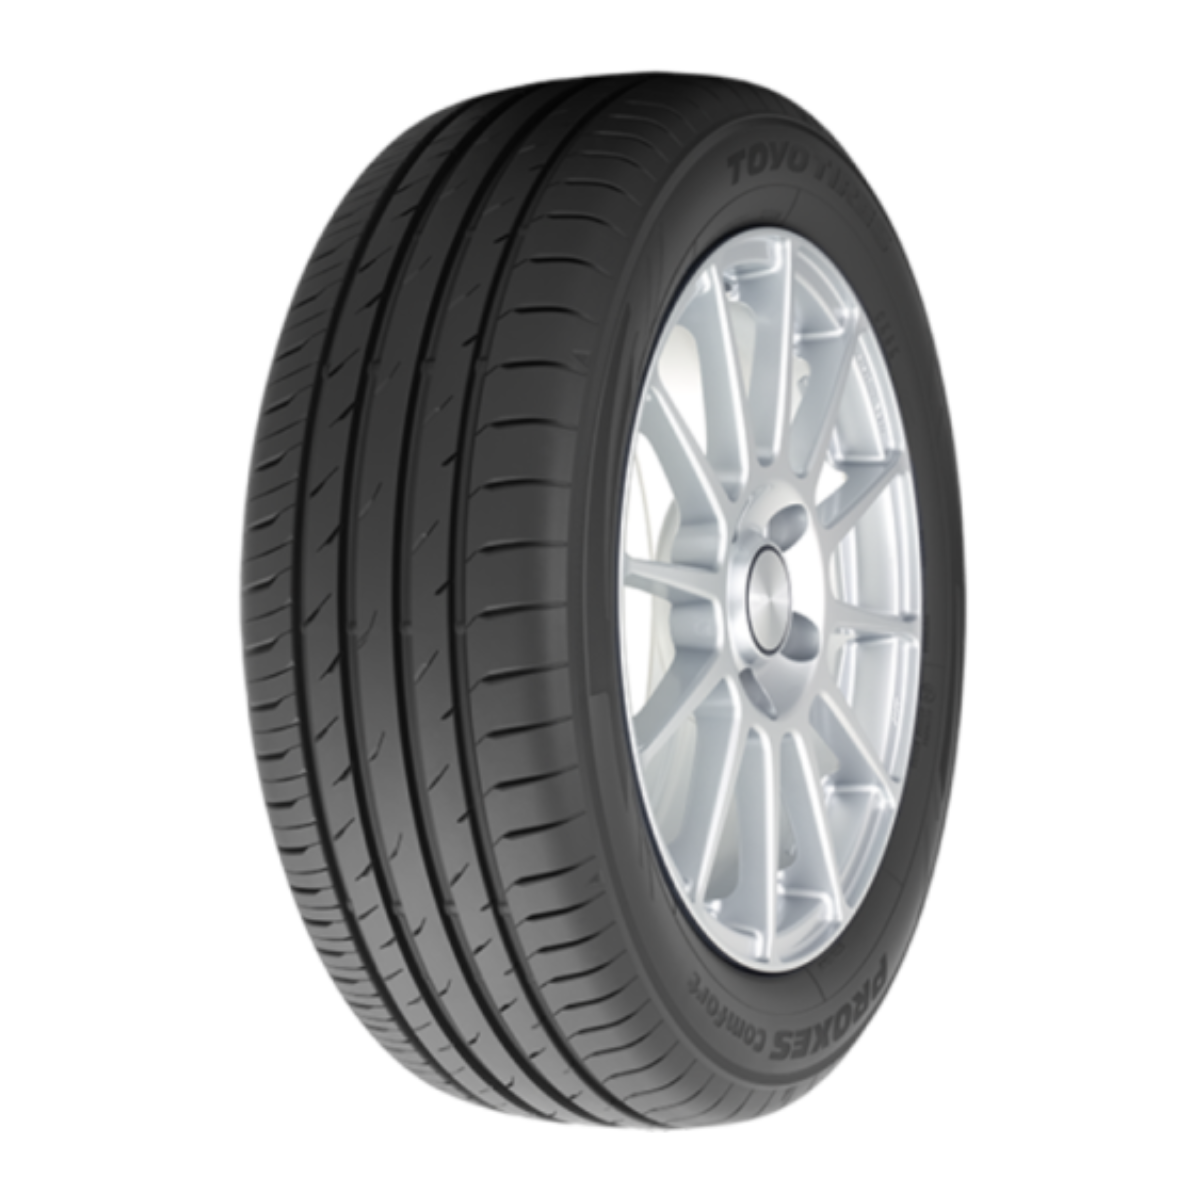 225/60/R18 Toyo Proxes Comfort 104W